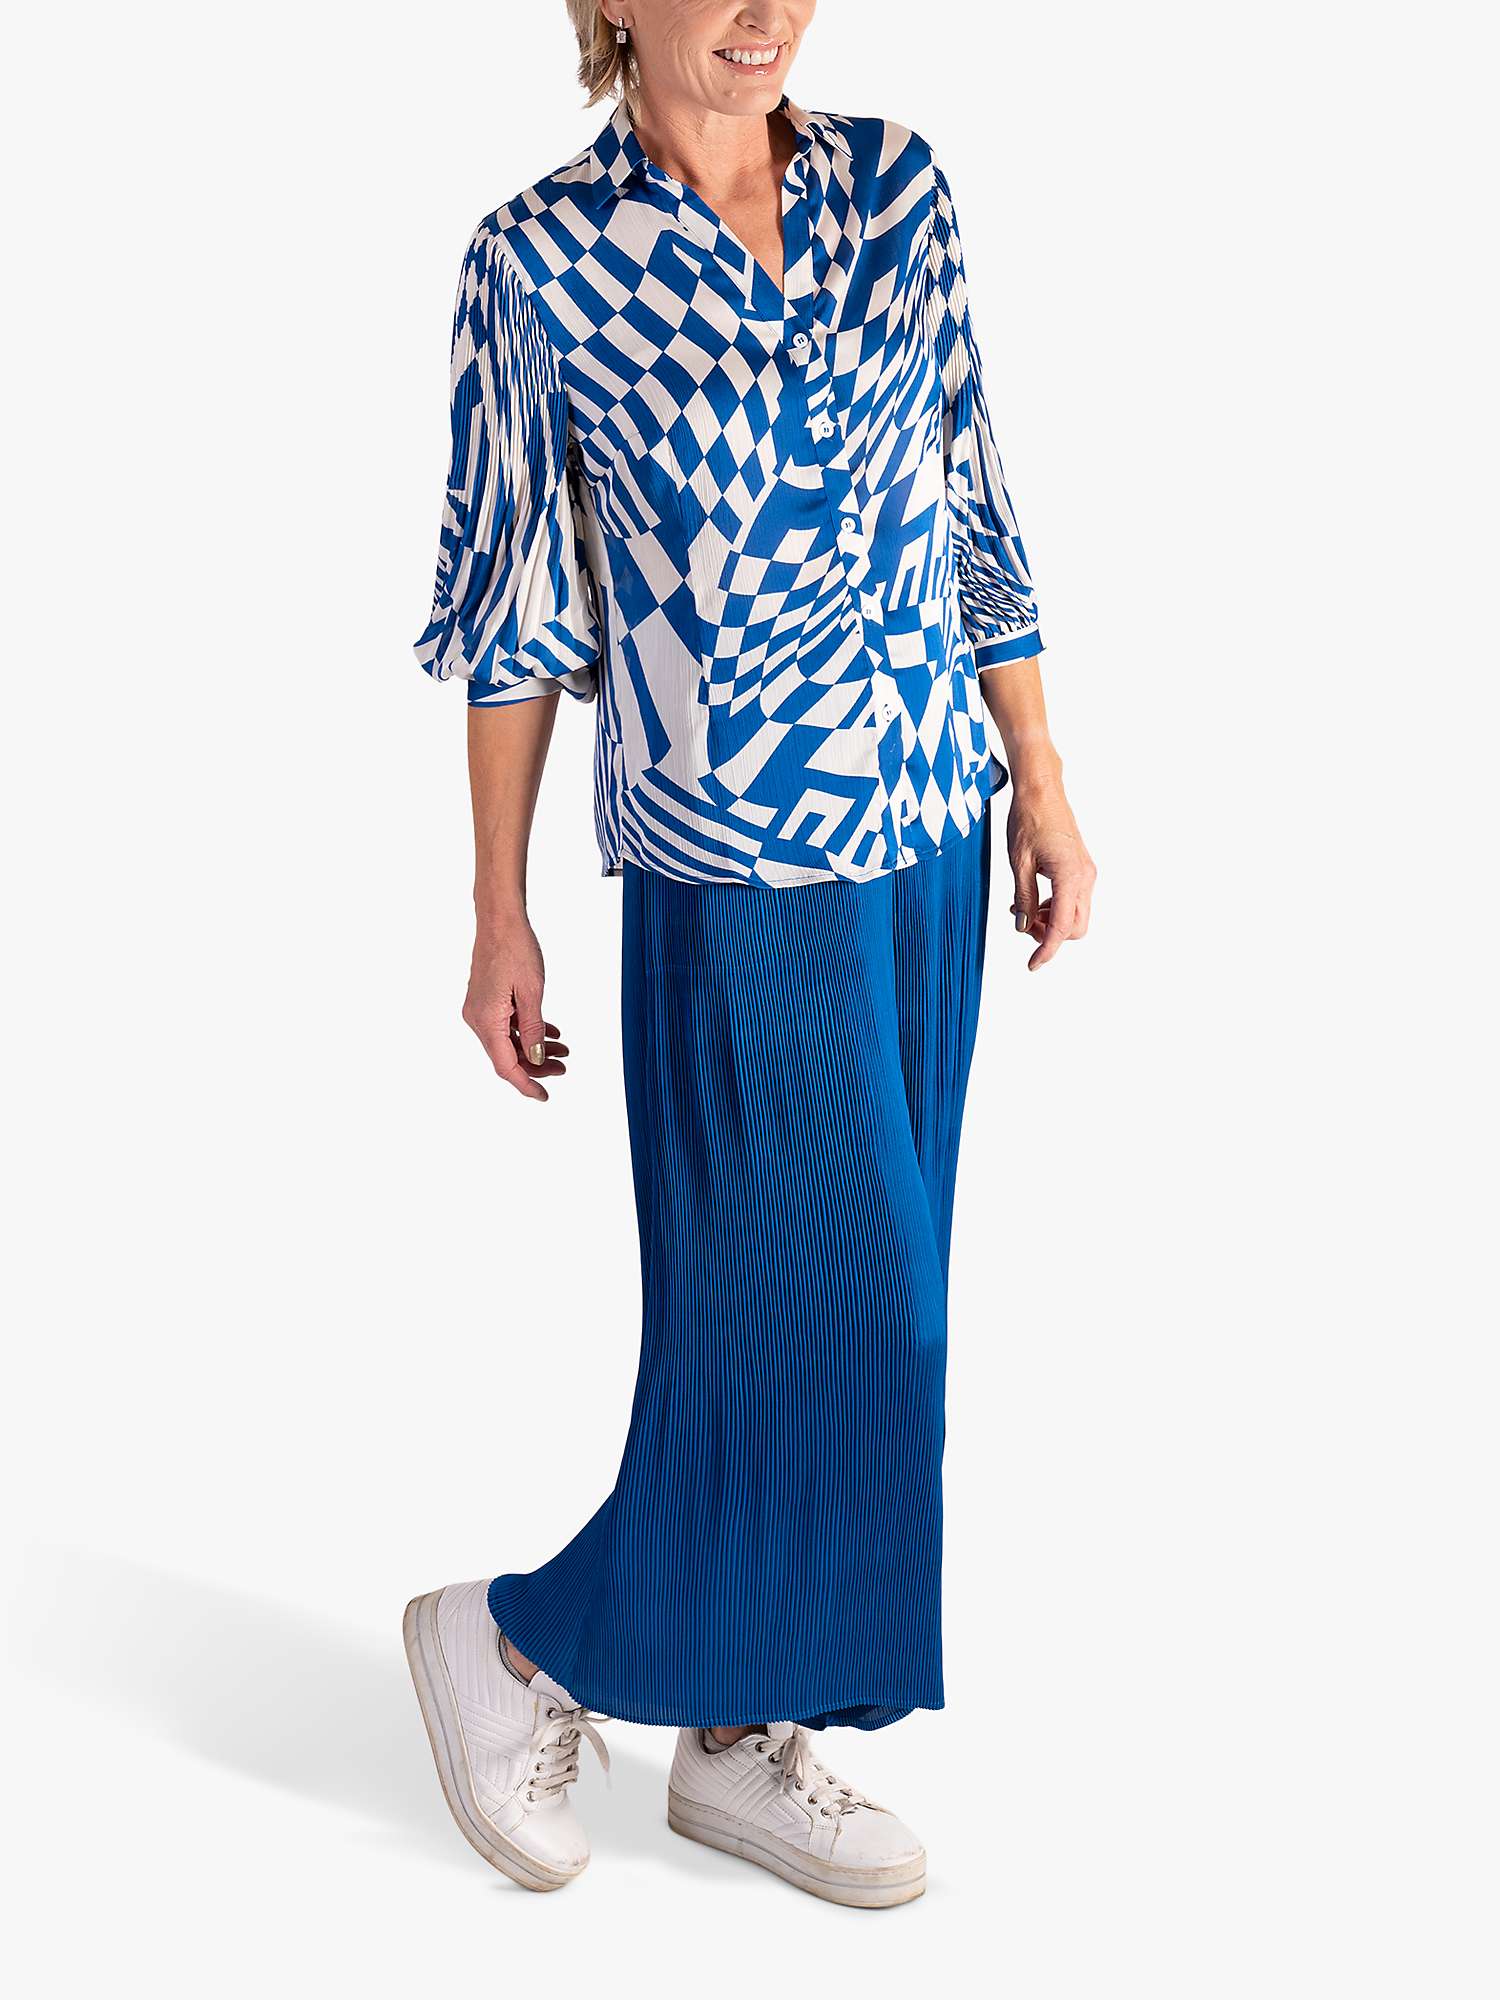 Buy chesca Pleated Wide Leg Trousers, Royal Blue Online at johnlewis.com